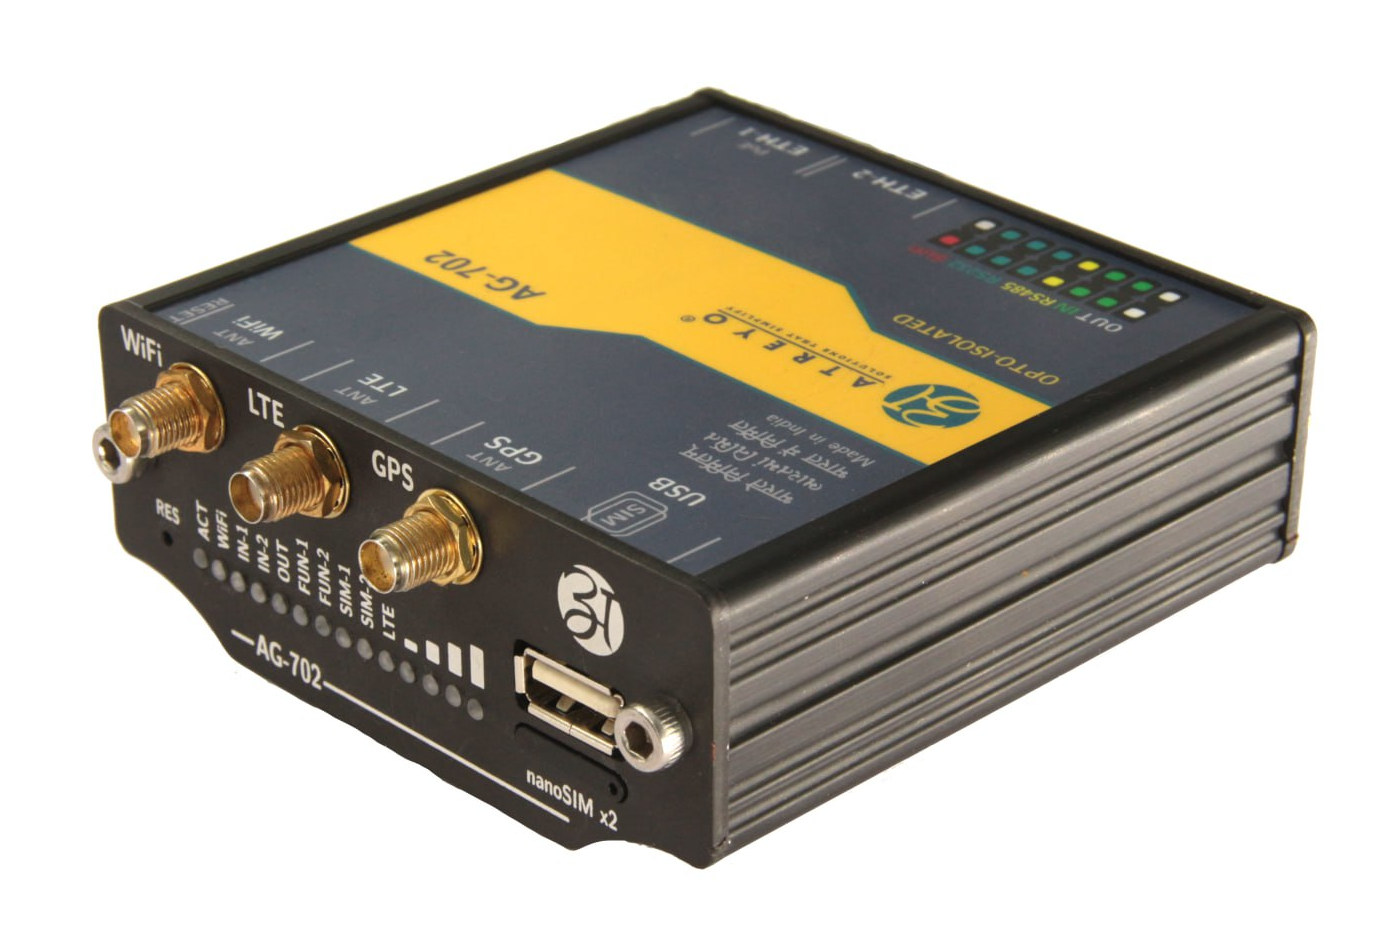 Industrial OpenWrt gateway features MediaTek MT7628 SoC, WiFi, LTE, and GNSS connectivity